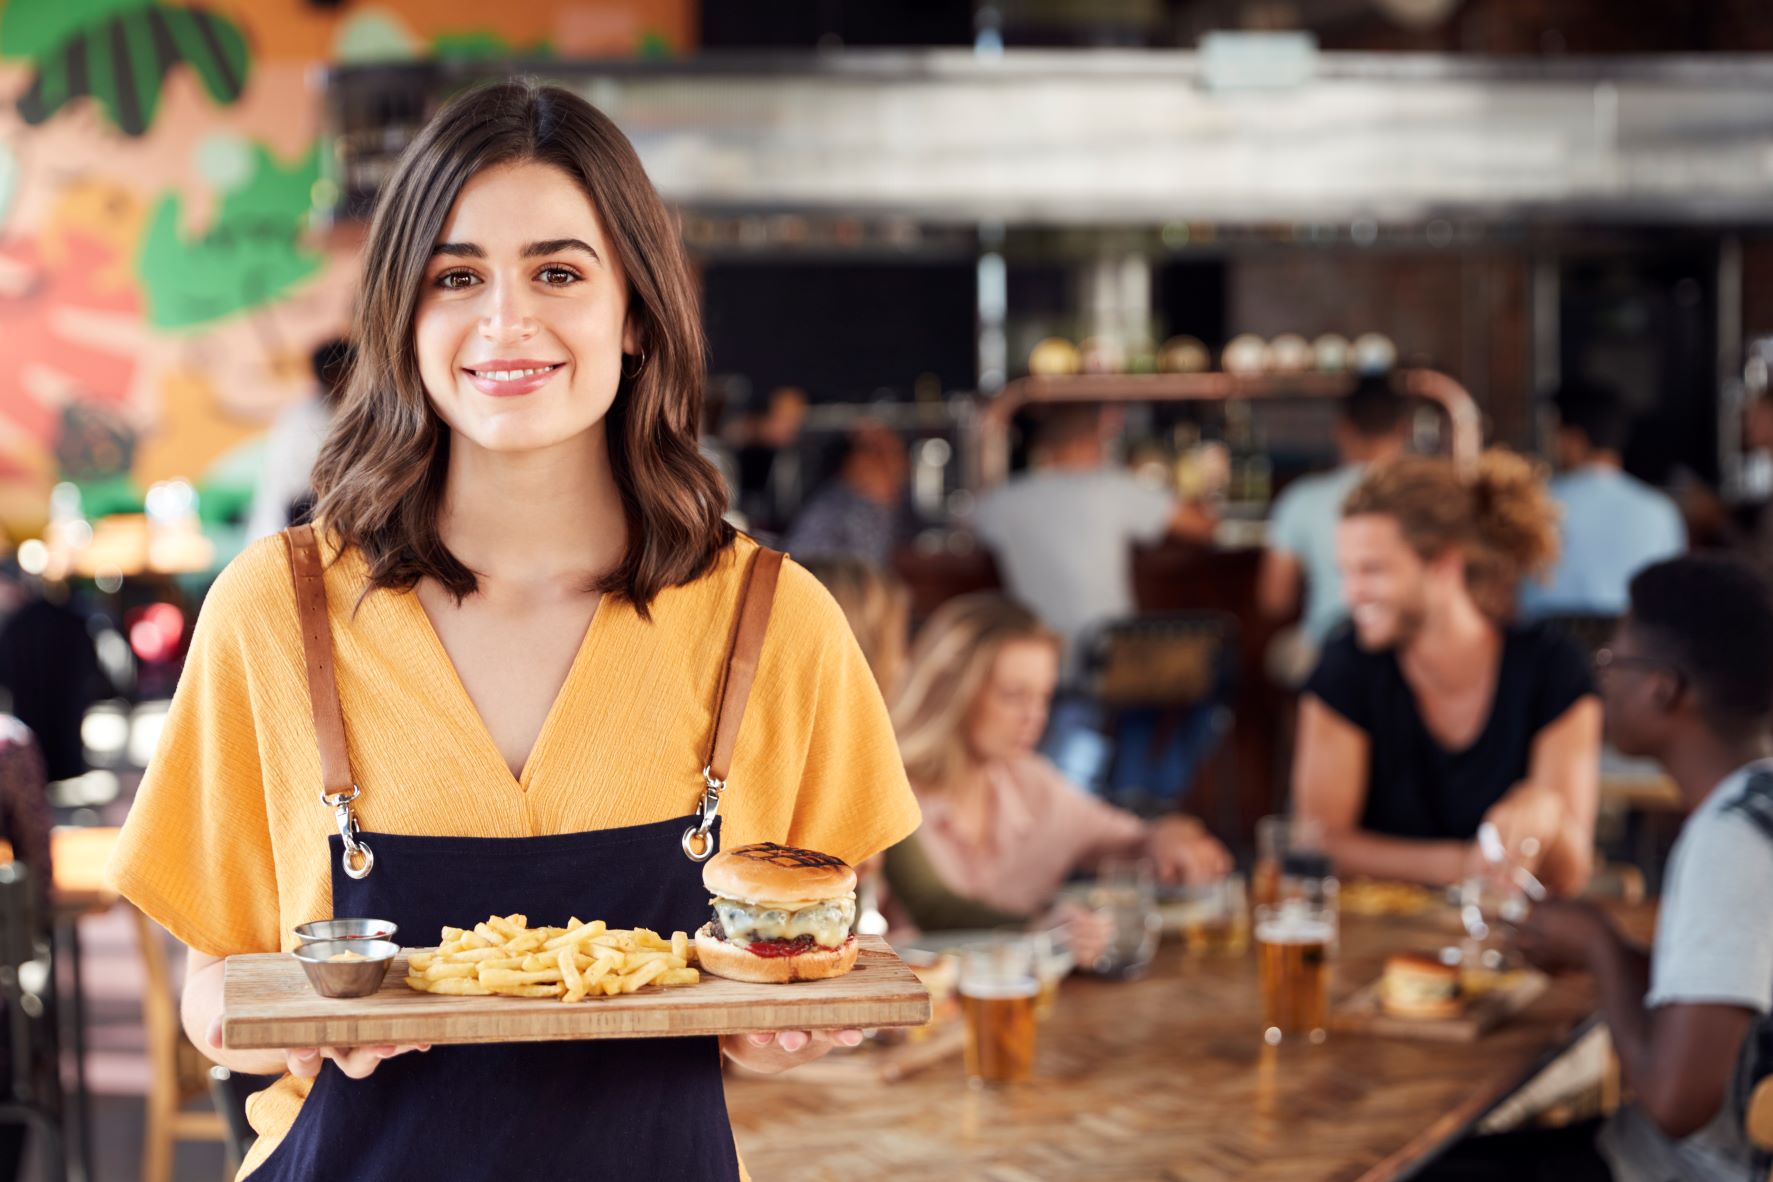 How to Build Trust and Loyalty With Your Restaurant Guests